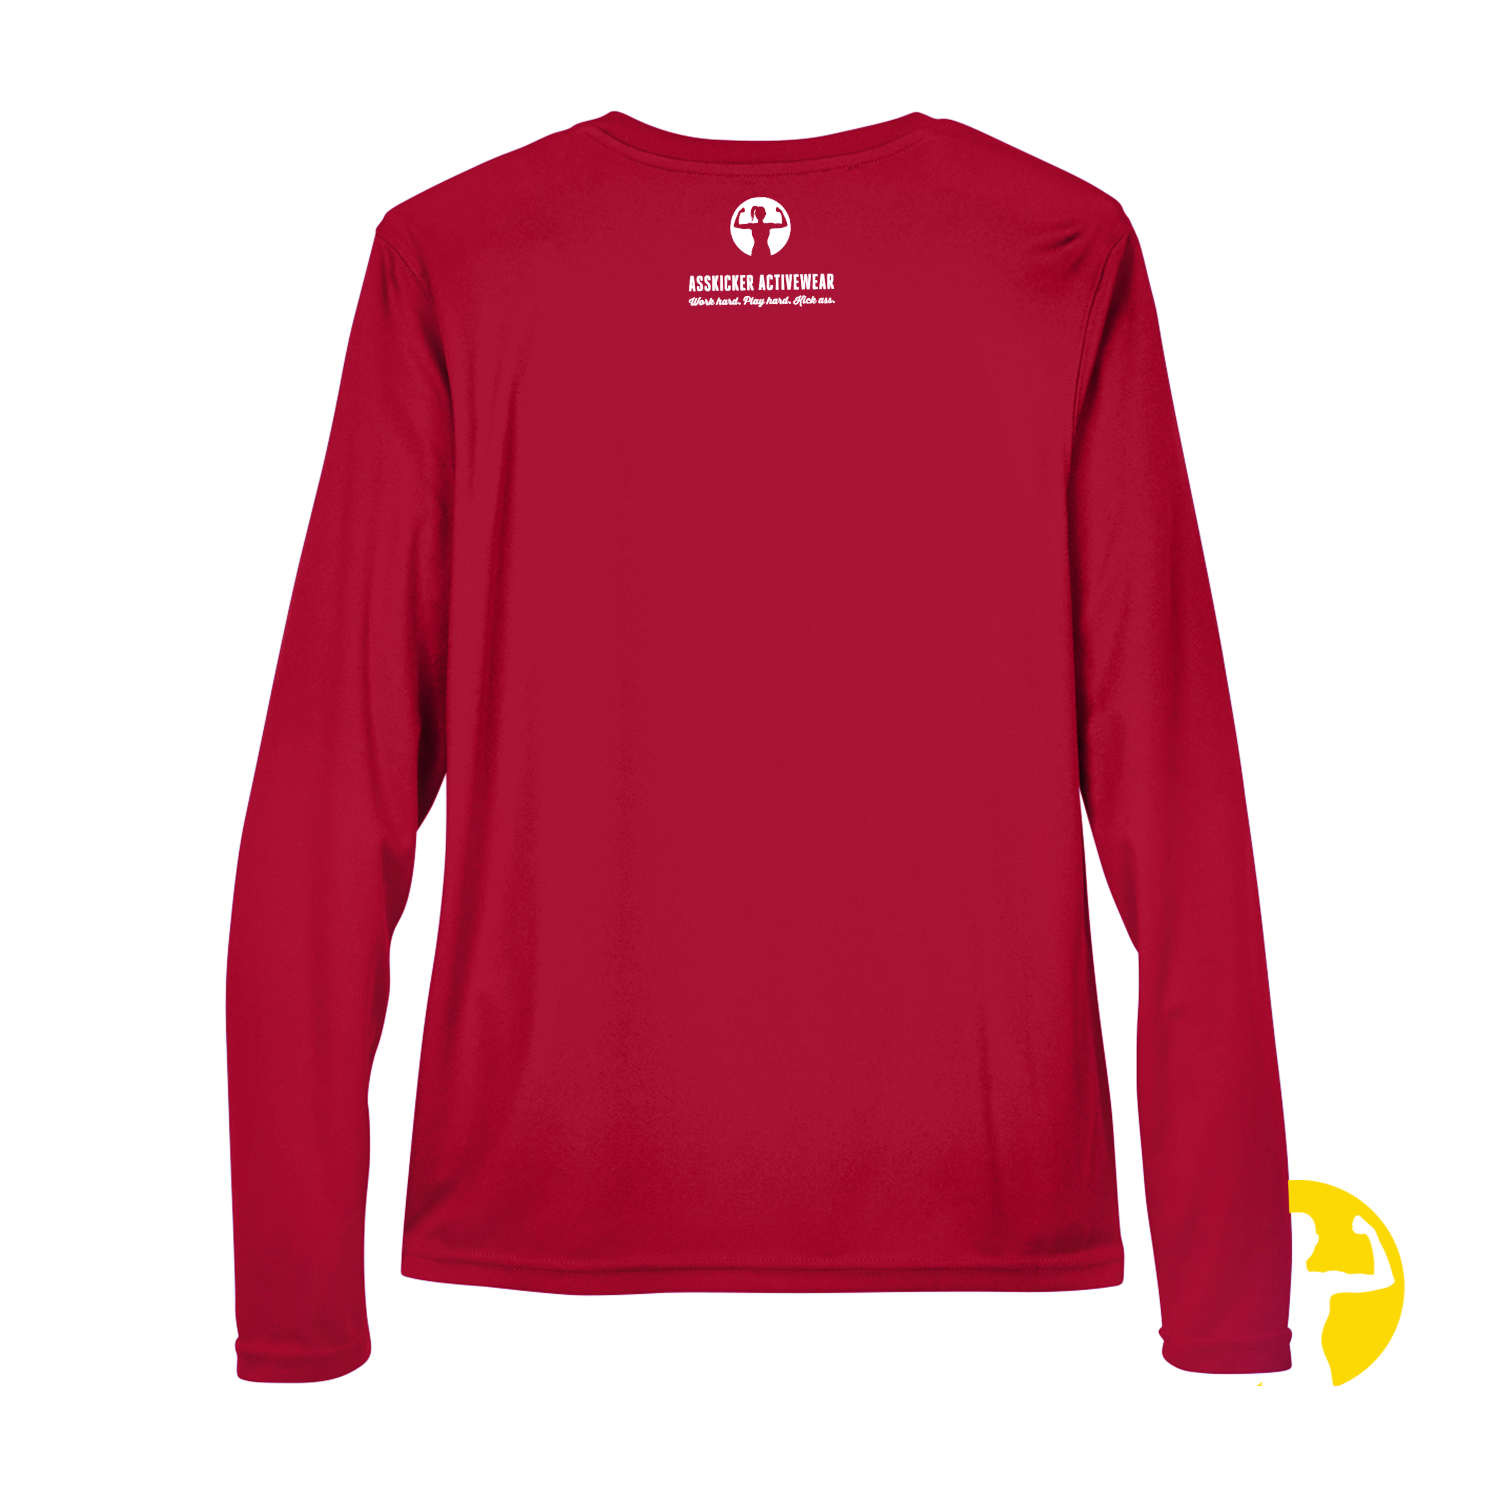 True North Strong & Free Performance Dryfit  Long-Sleeve Shirt